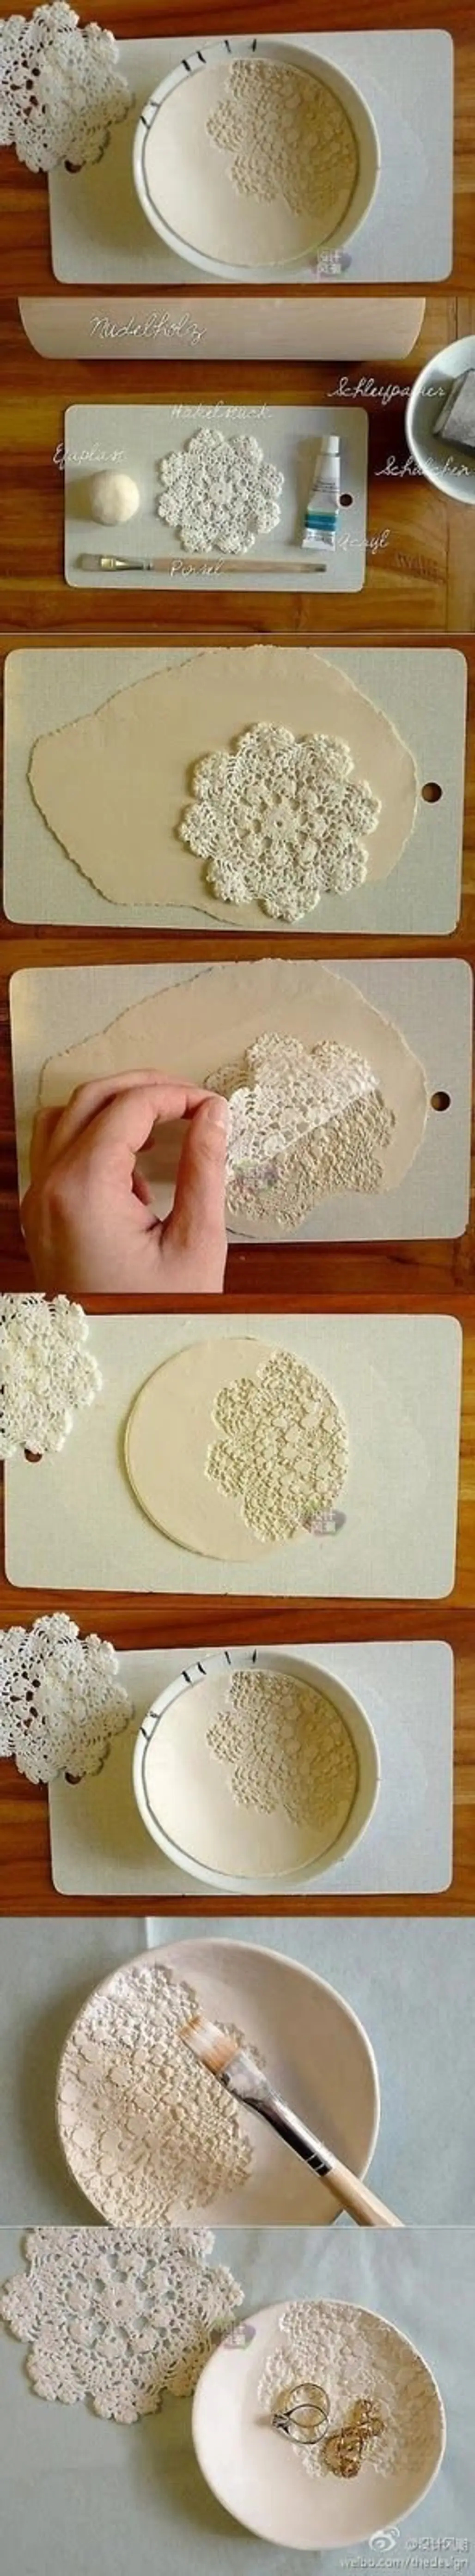 Make Your Own Lace Bowl